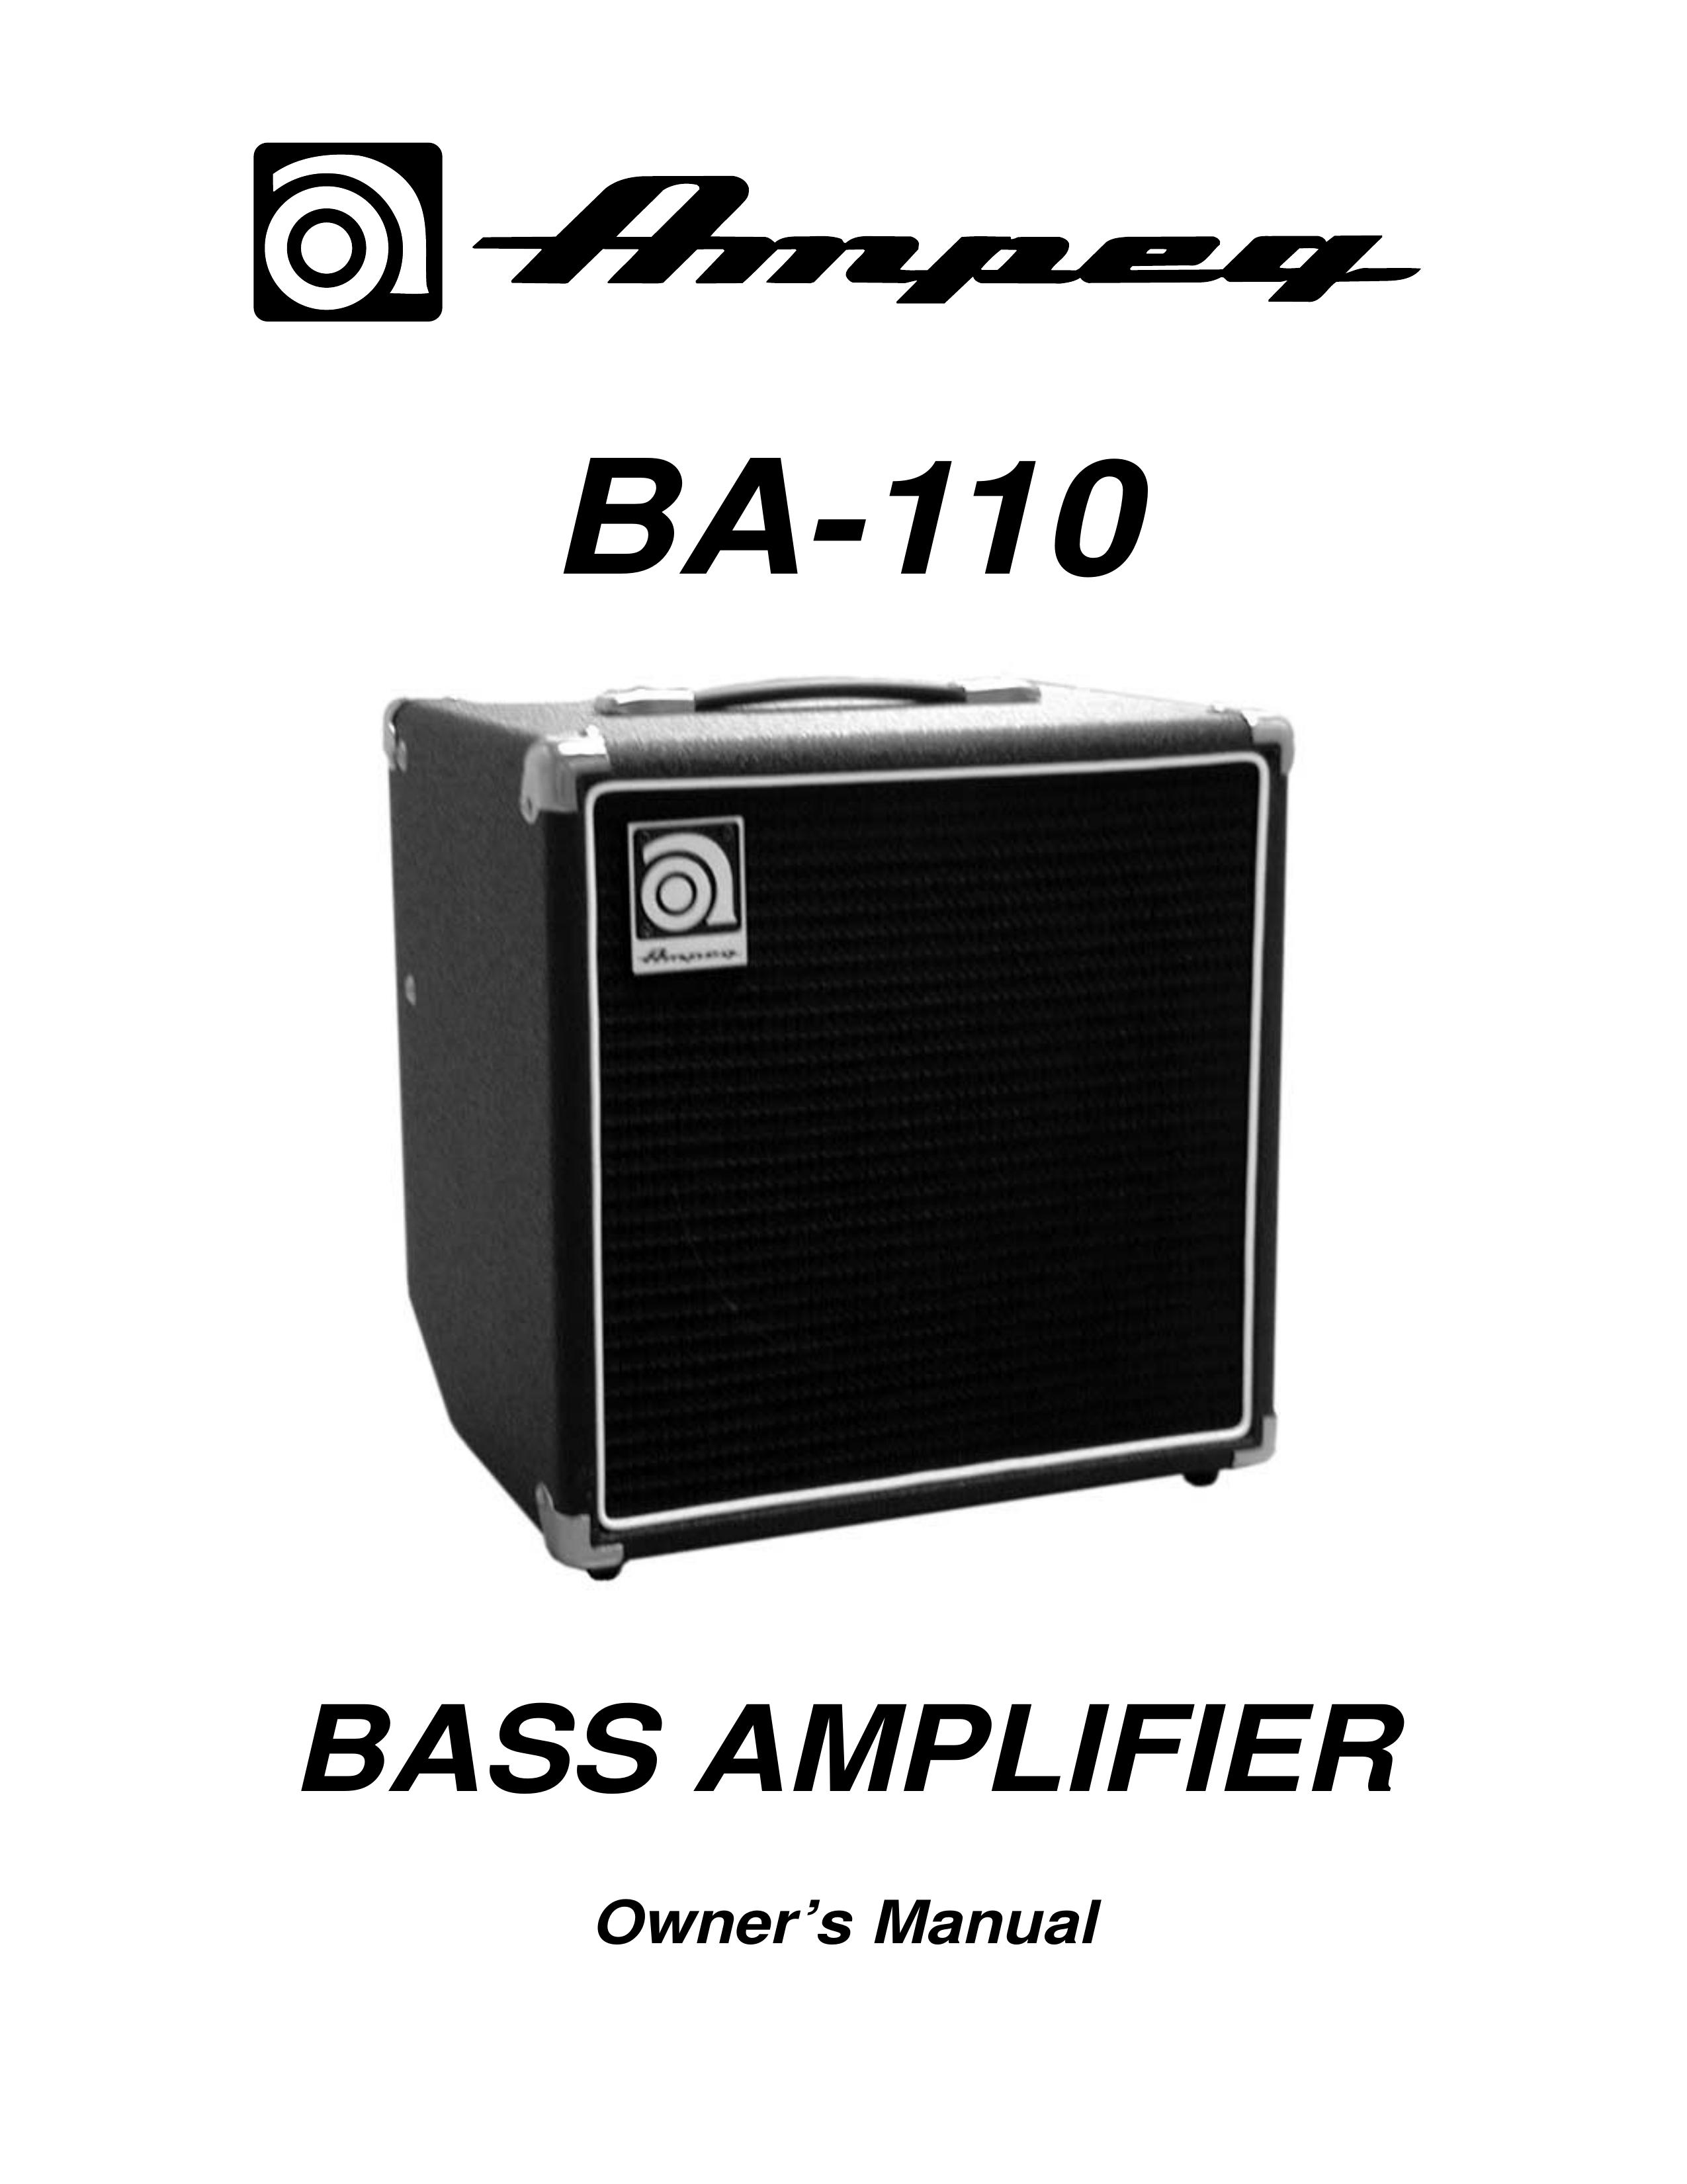 Ampeg BA-110 Musical Instrument Amplifier User Manual (Page 1)